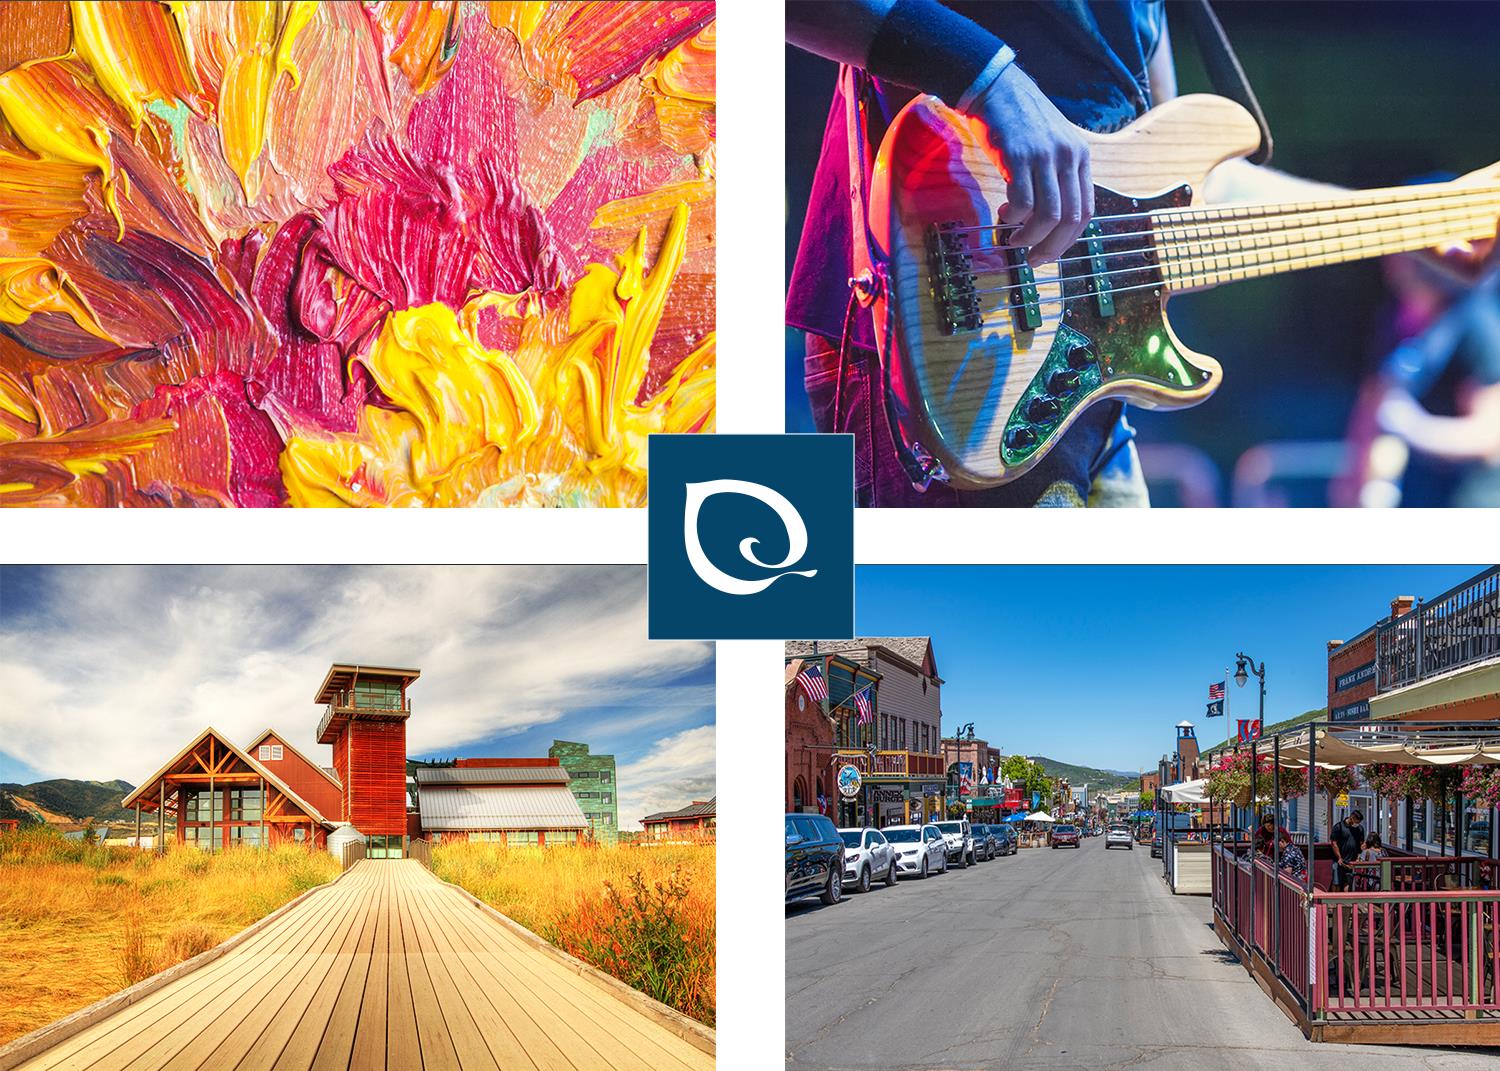 Four photos appear one of vibrant flower oil painting, a close up of a person playing guitar, the exterior of Swaner Preserve with boardwalk and riparian area around, and Main Street Park City, Utah